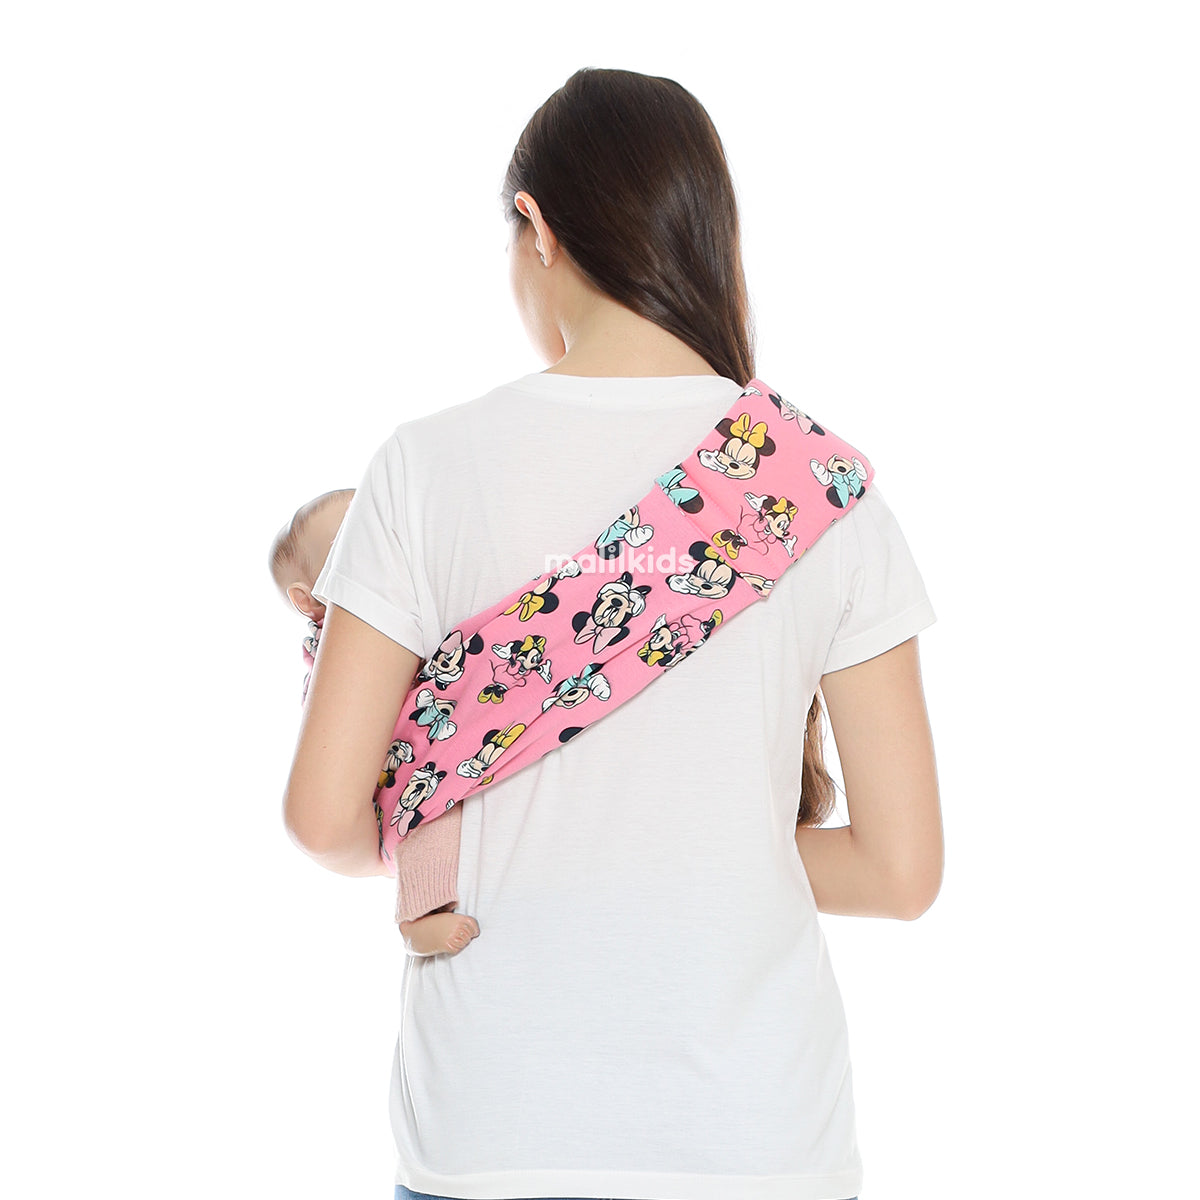 geos-sling-pouch-double-layer-cotton-cute-mouse-pink_12.jpg